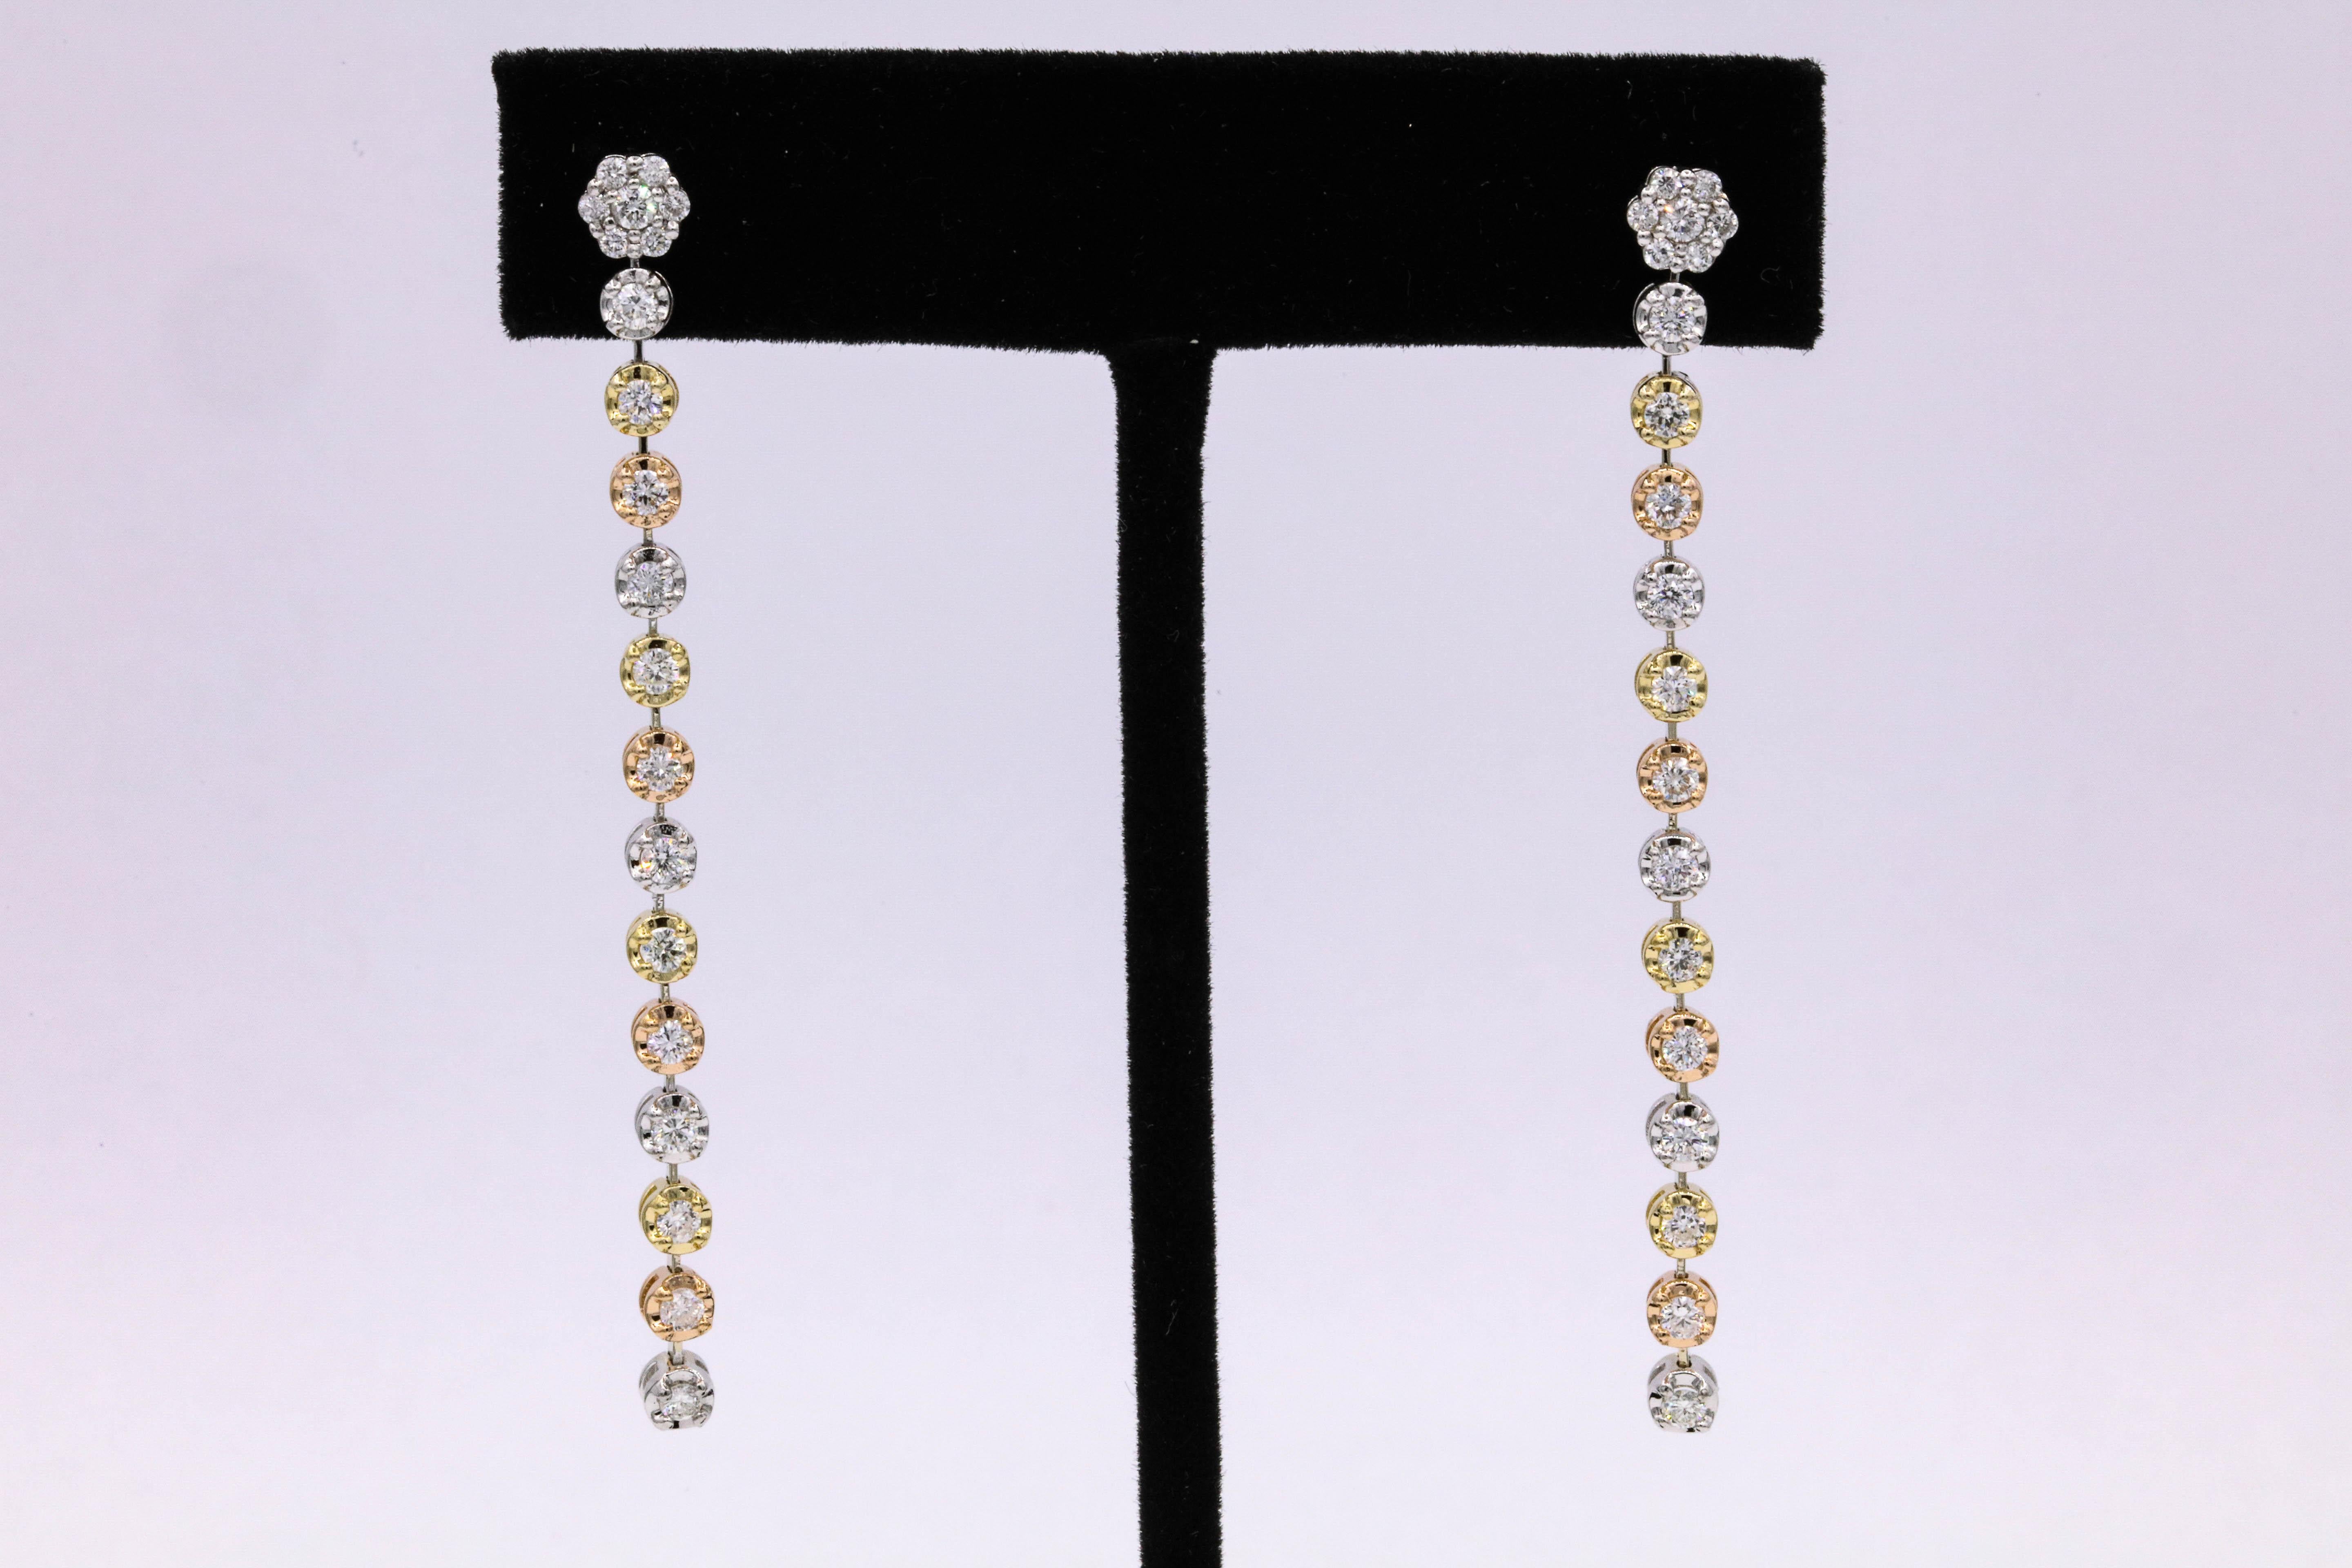 14K Tri-color drop earrings featuring 40 round brilliants weighing 1.50 carats.
Color G-H
Clarity SI